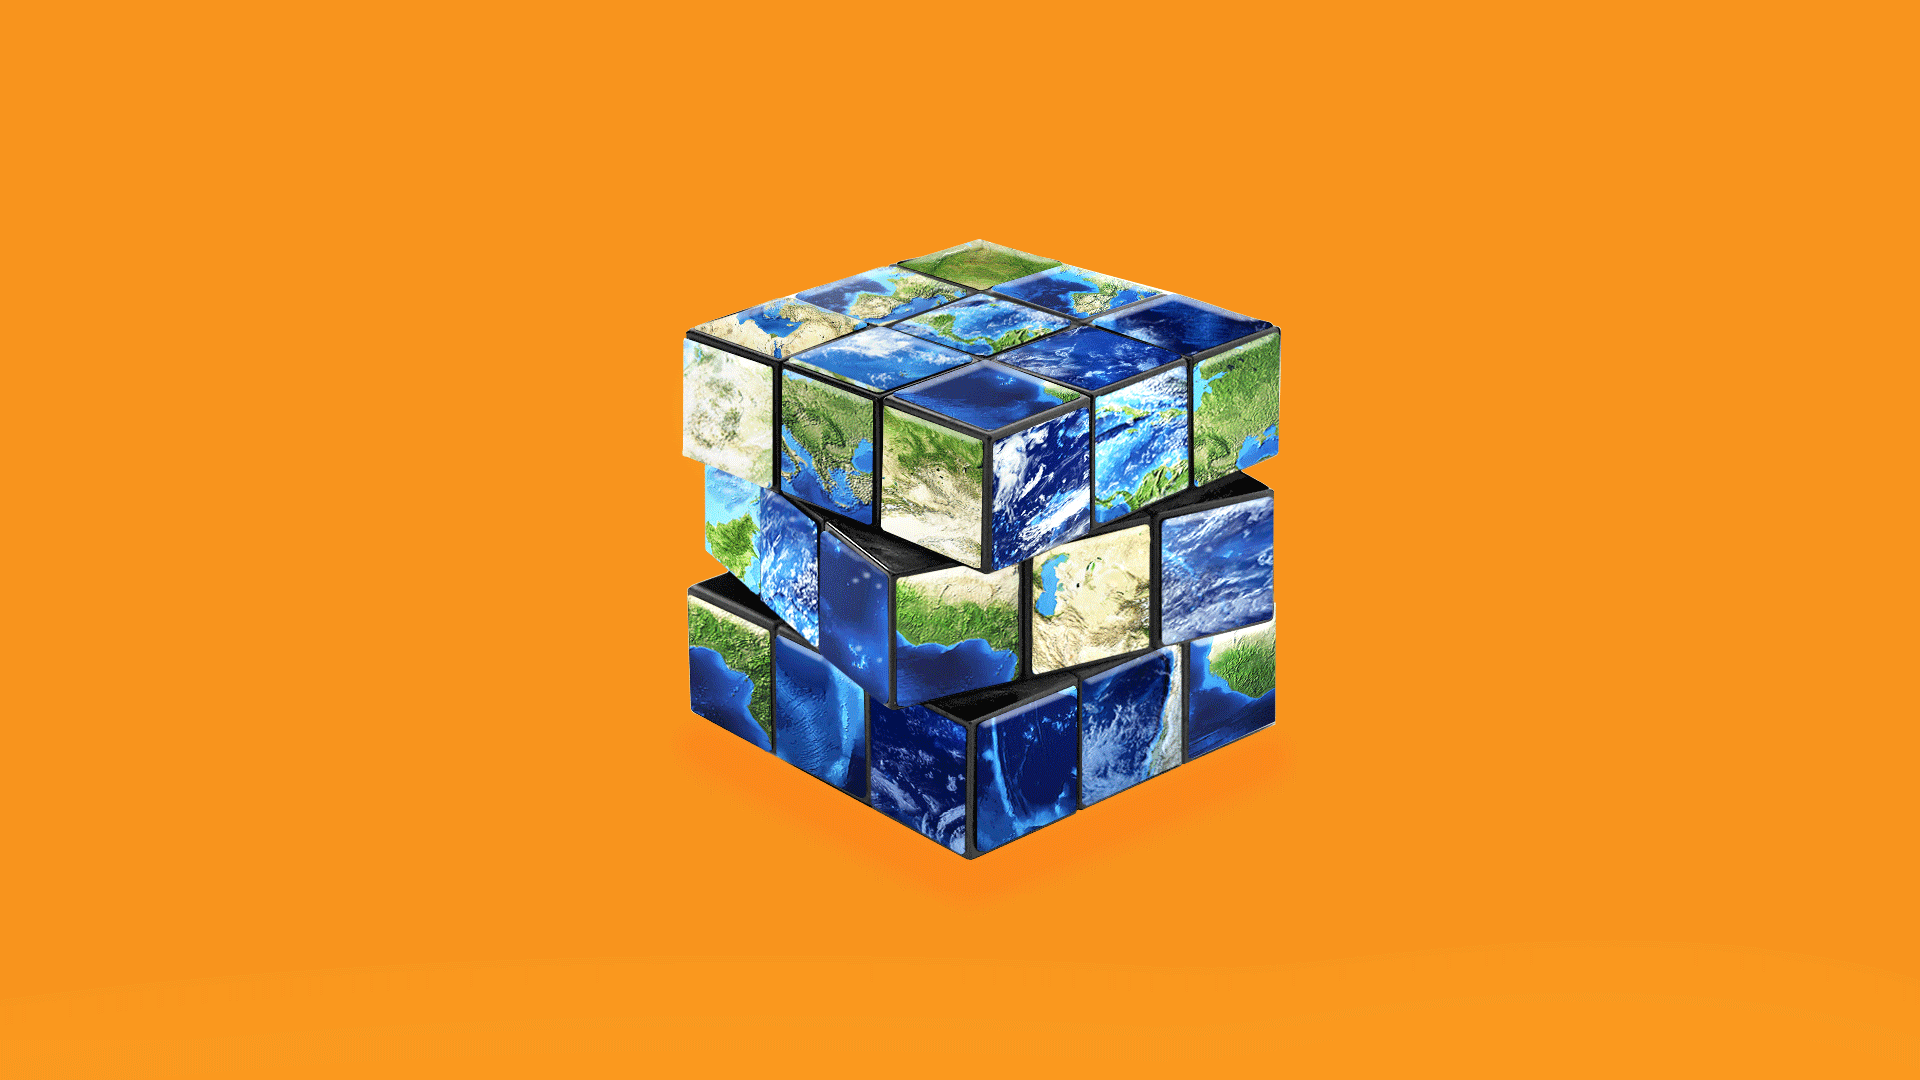 Illustration of a Rubik's cube made to look like a globe.